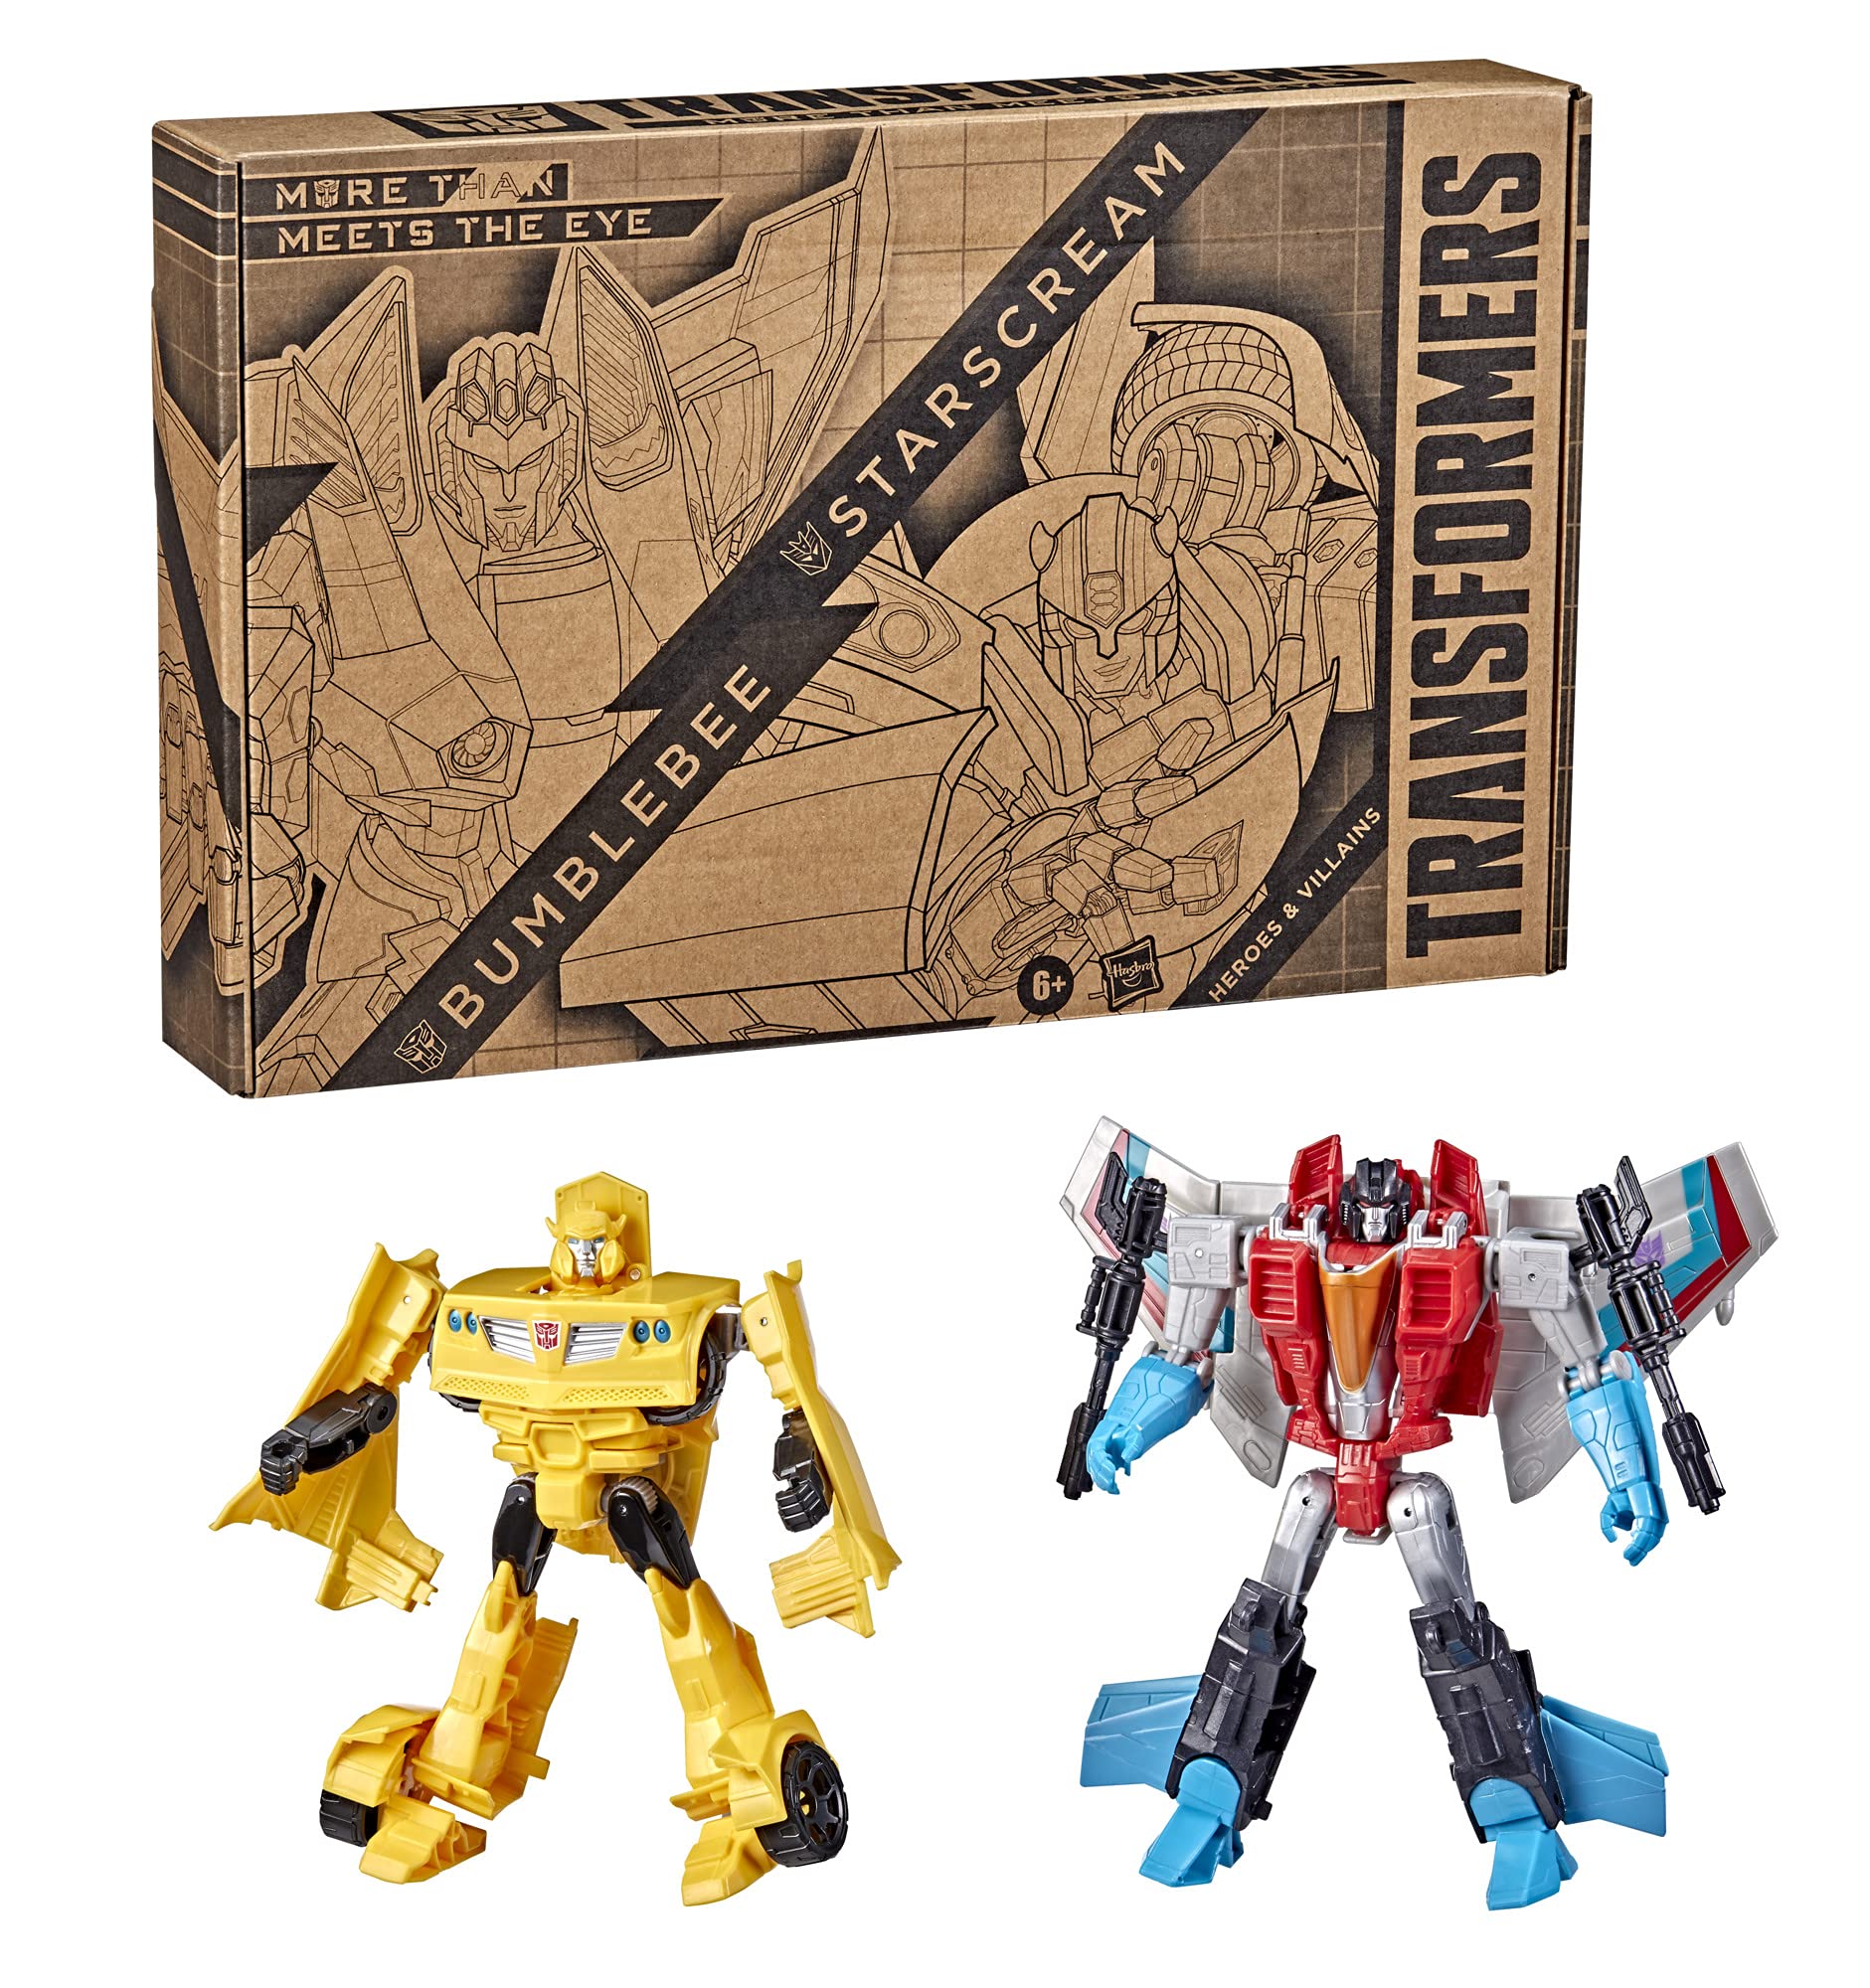 Transformers Toys Heroes and Villains Bumblebee and Starscream 2-Pack Action Figures - for Kids Ages 6 and Up, 7-inch (Amazon Exclusive)